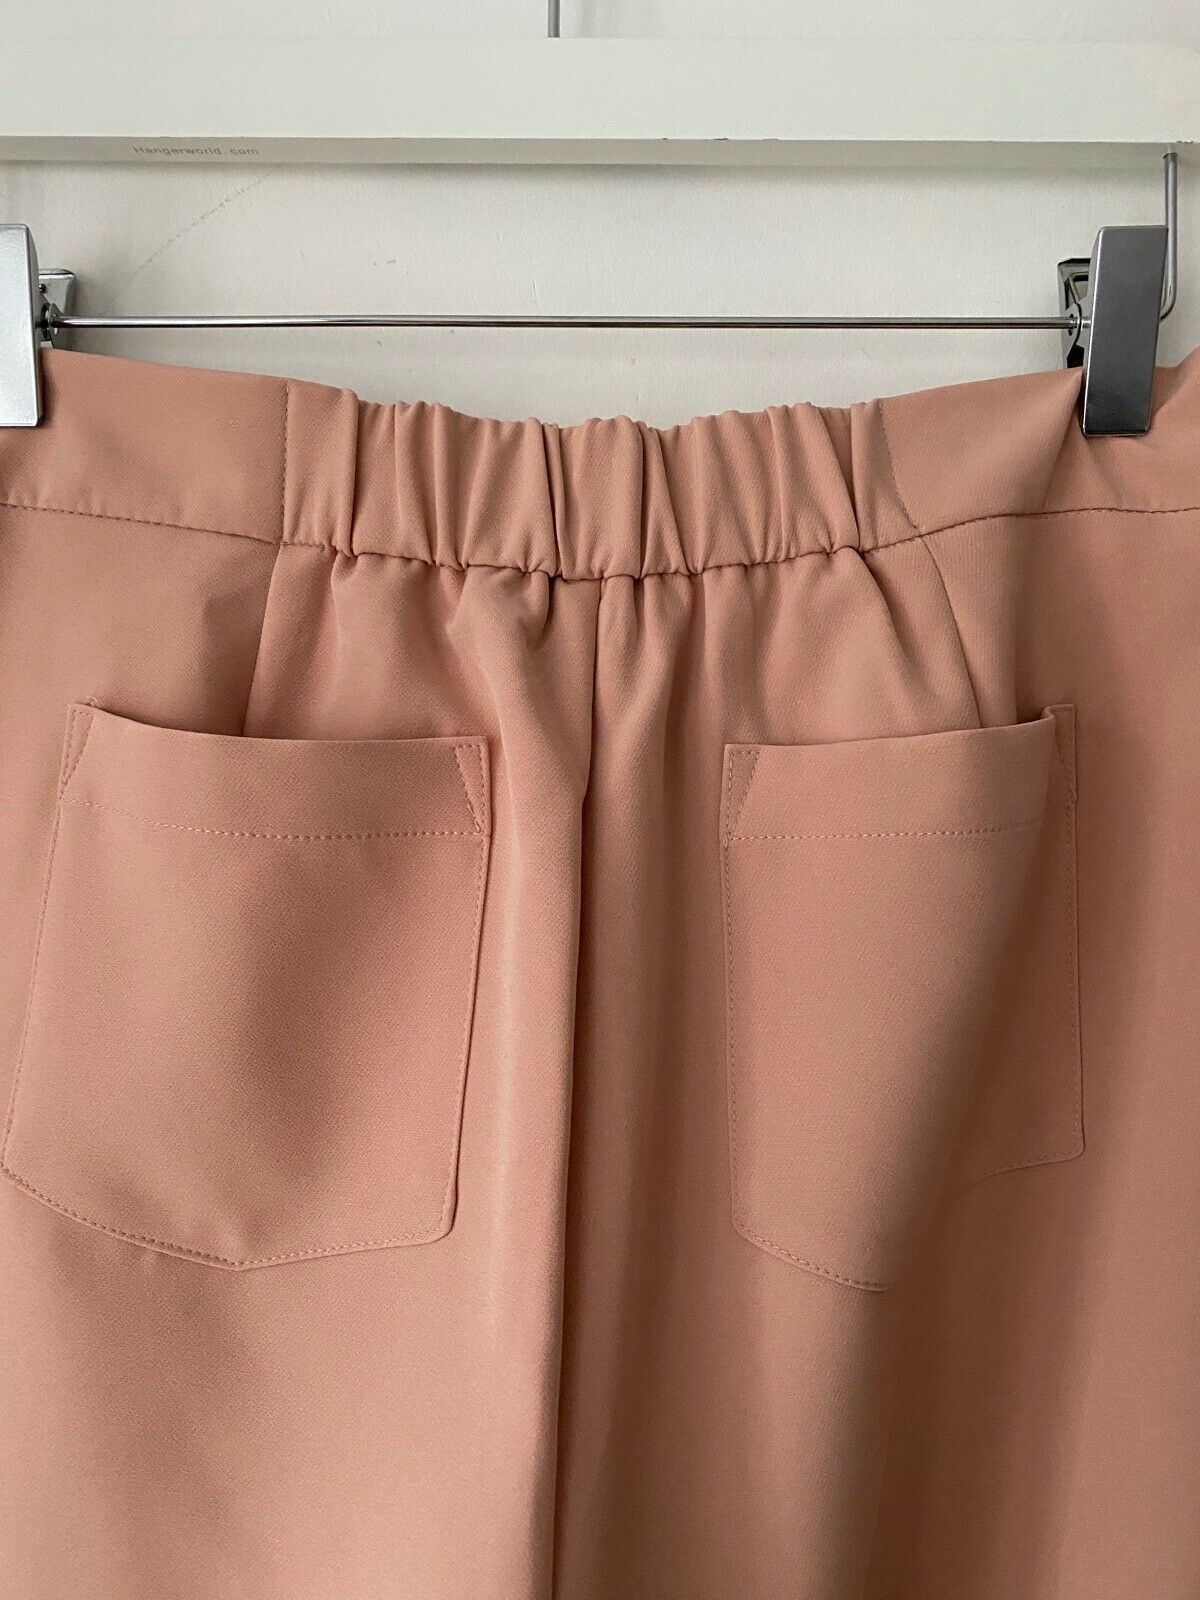 VERY Blush Pink Crop Trousers Size 10